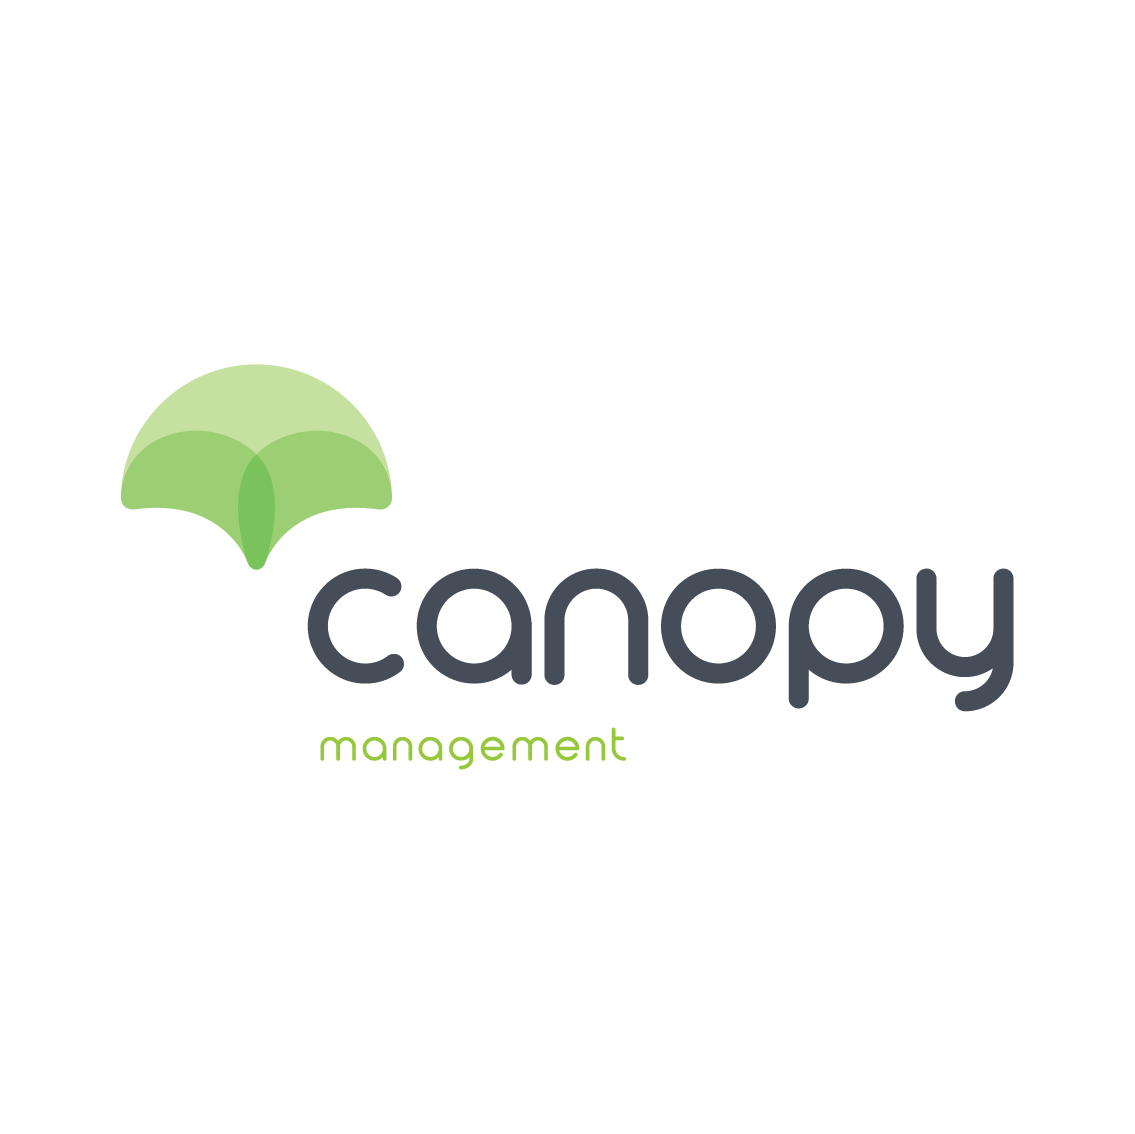 CANOPY Management: A Full-Service Amazon Account Management Agency